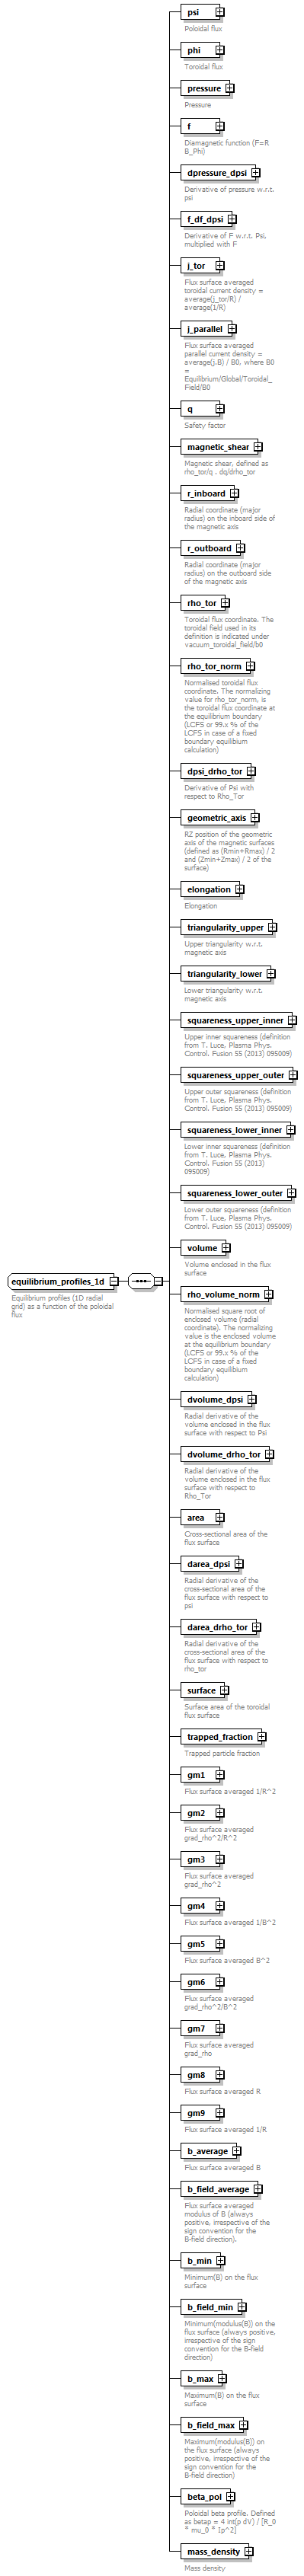 dd_data_dictionary.xml_p1969.png